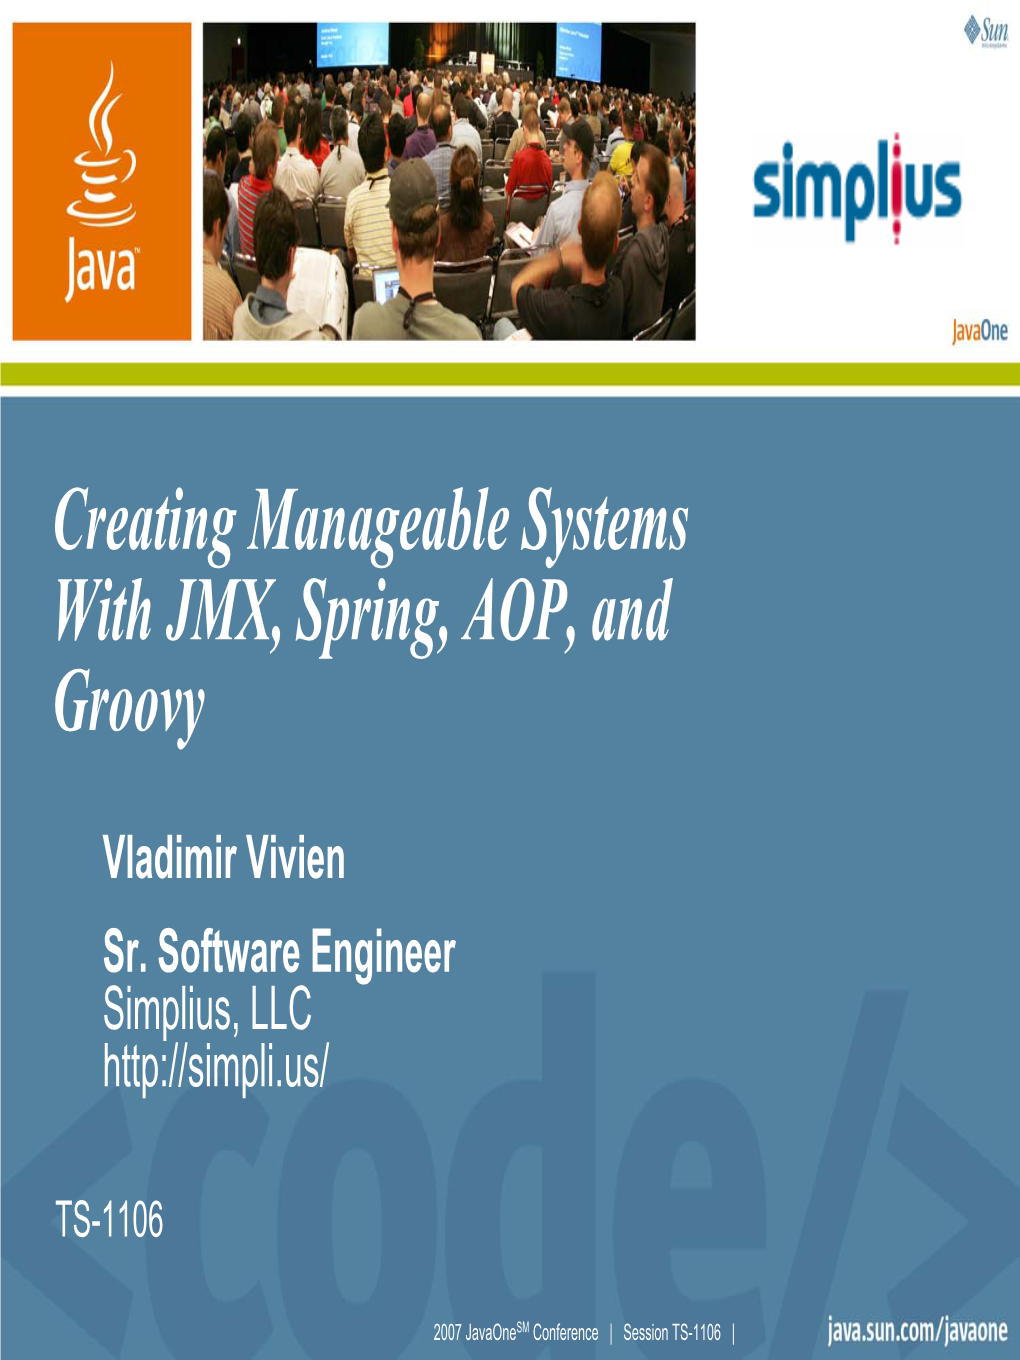 Creating Manageable Systems with JMX, Spring, AOP, and Groovy